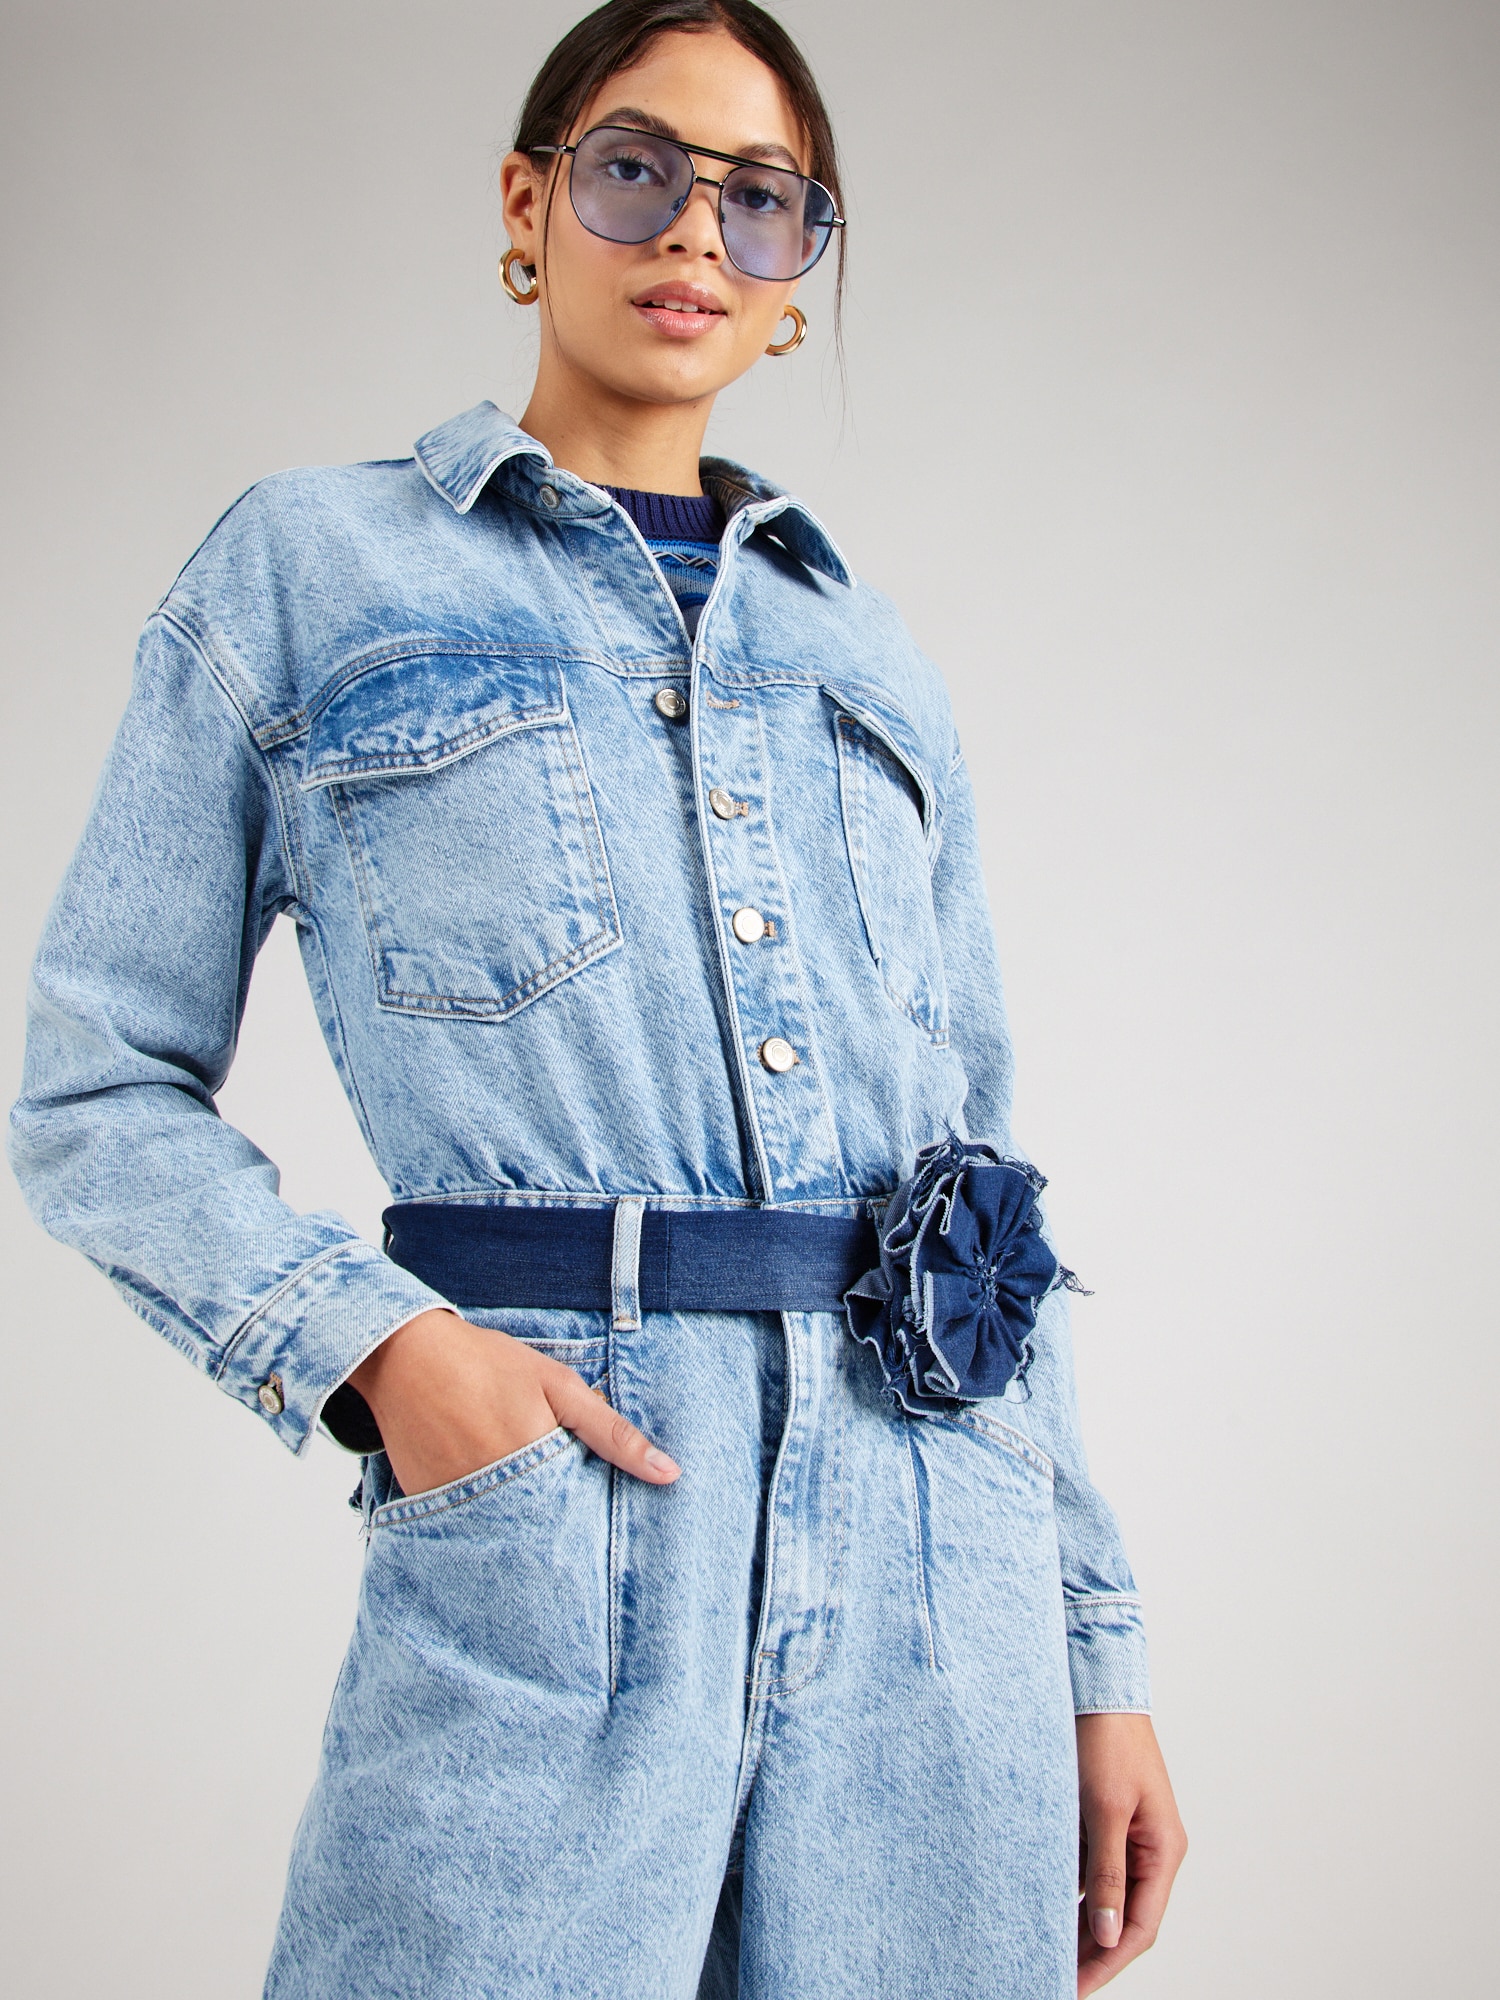 Jumpsuit 'TOUCH THE SKY' von Free People